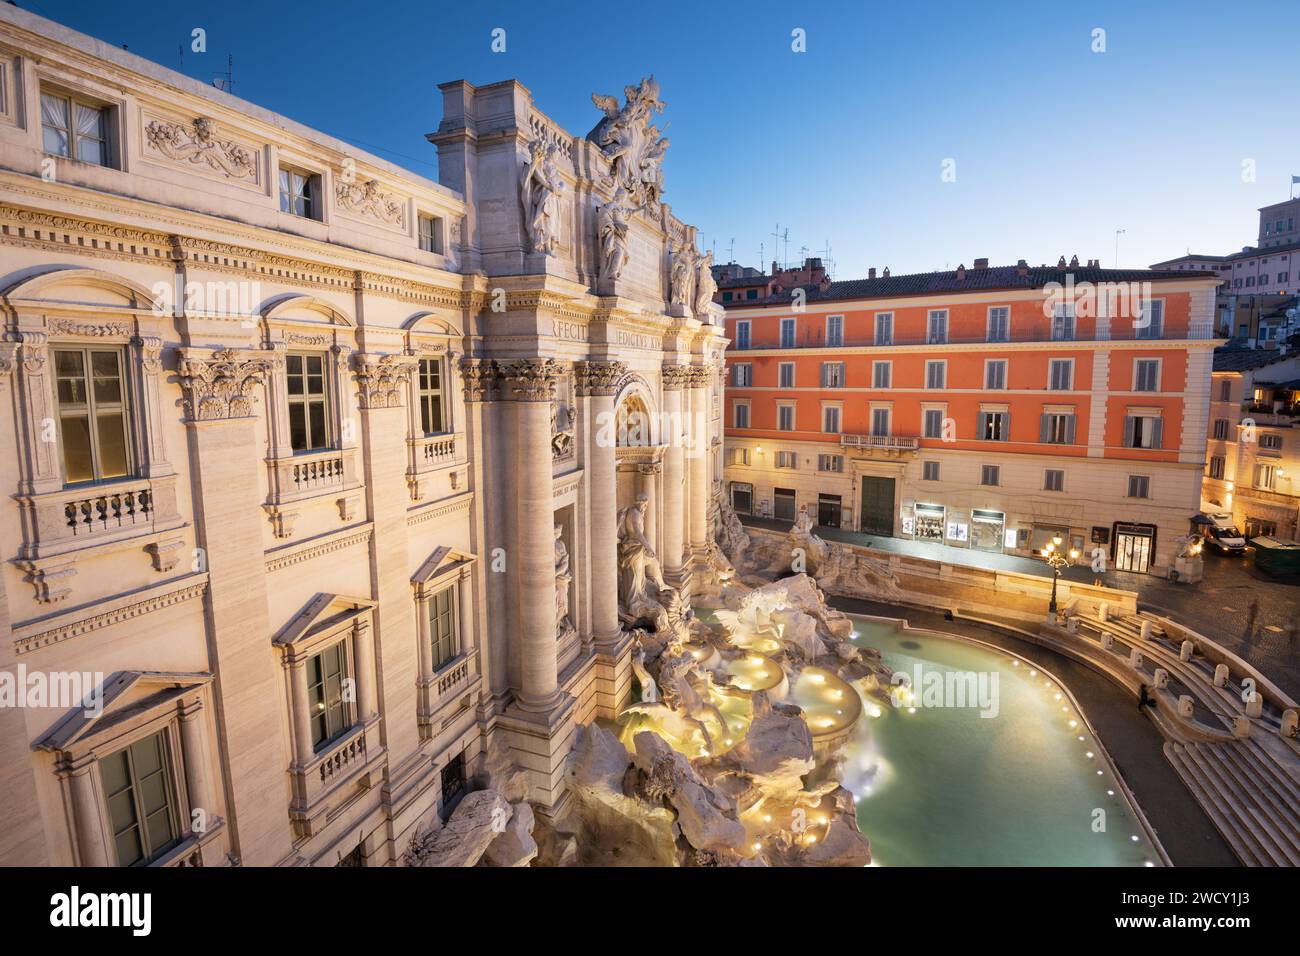 Rome, Italy cityscape overlooking Trevi Fountain at dawn. Stock Photo